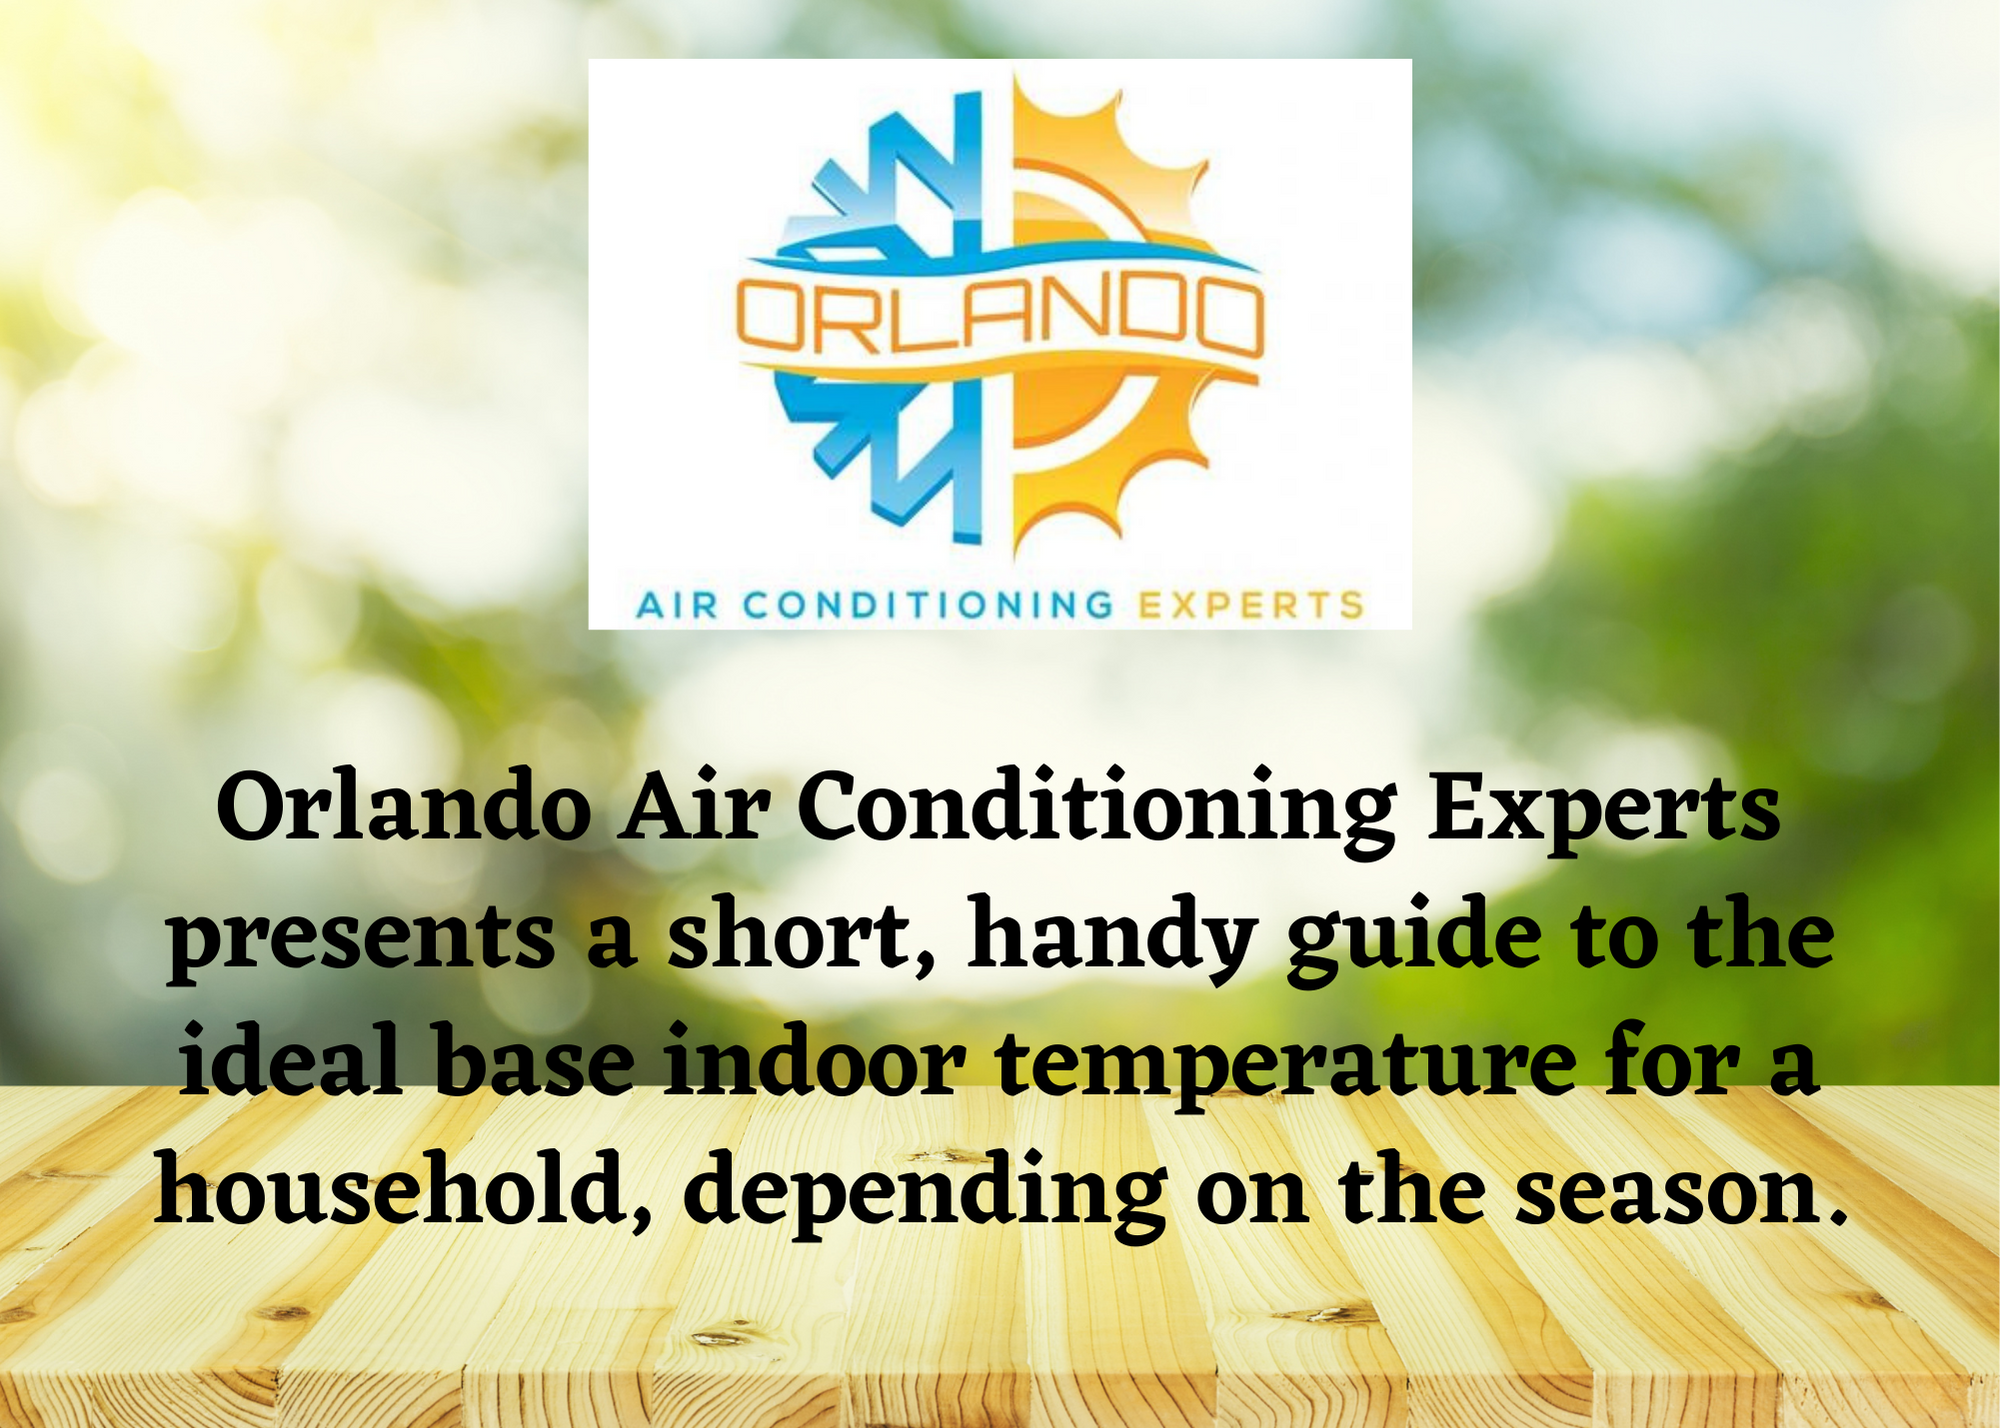 Orlando Air Conditioning Experts, Wednesday, December 1, 2021, Press release picture